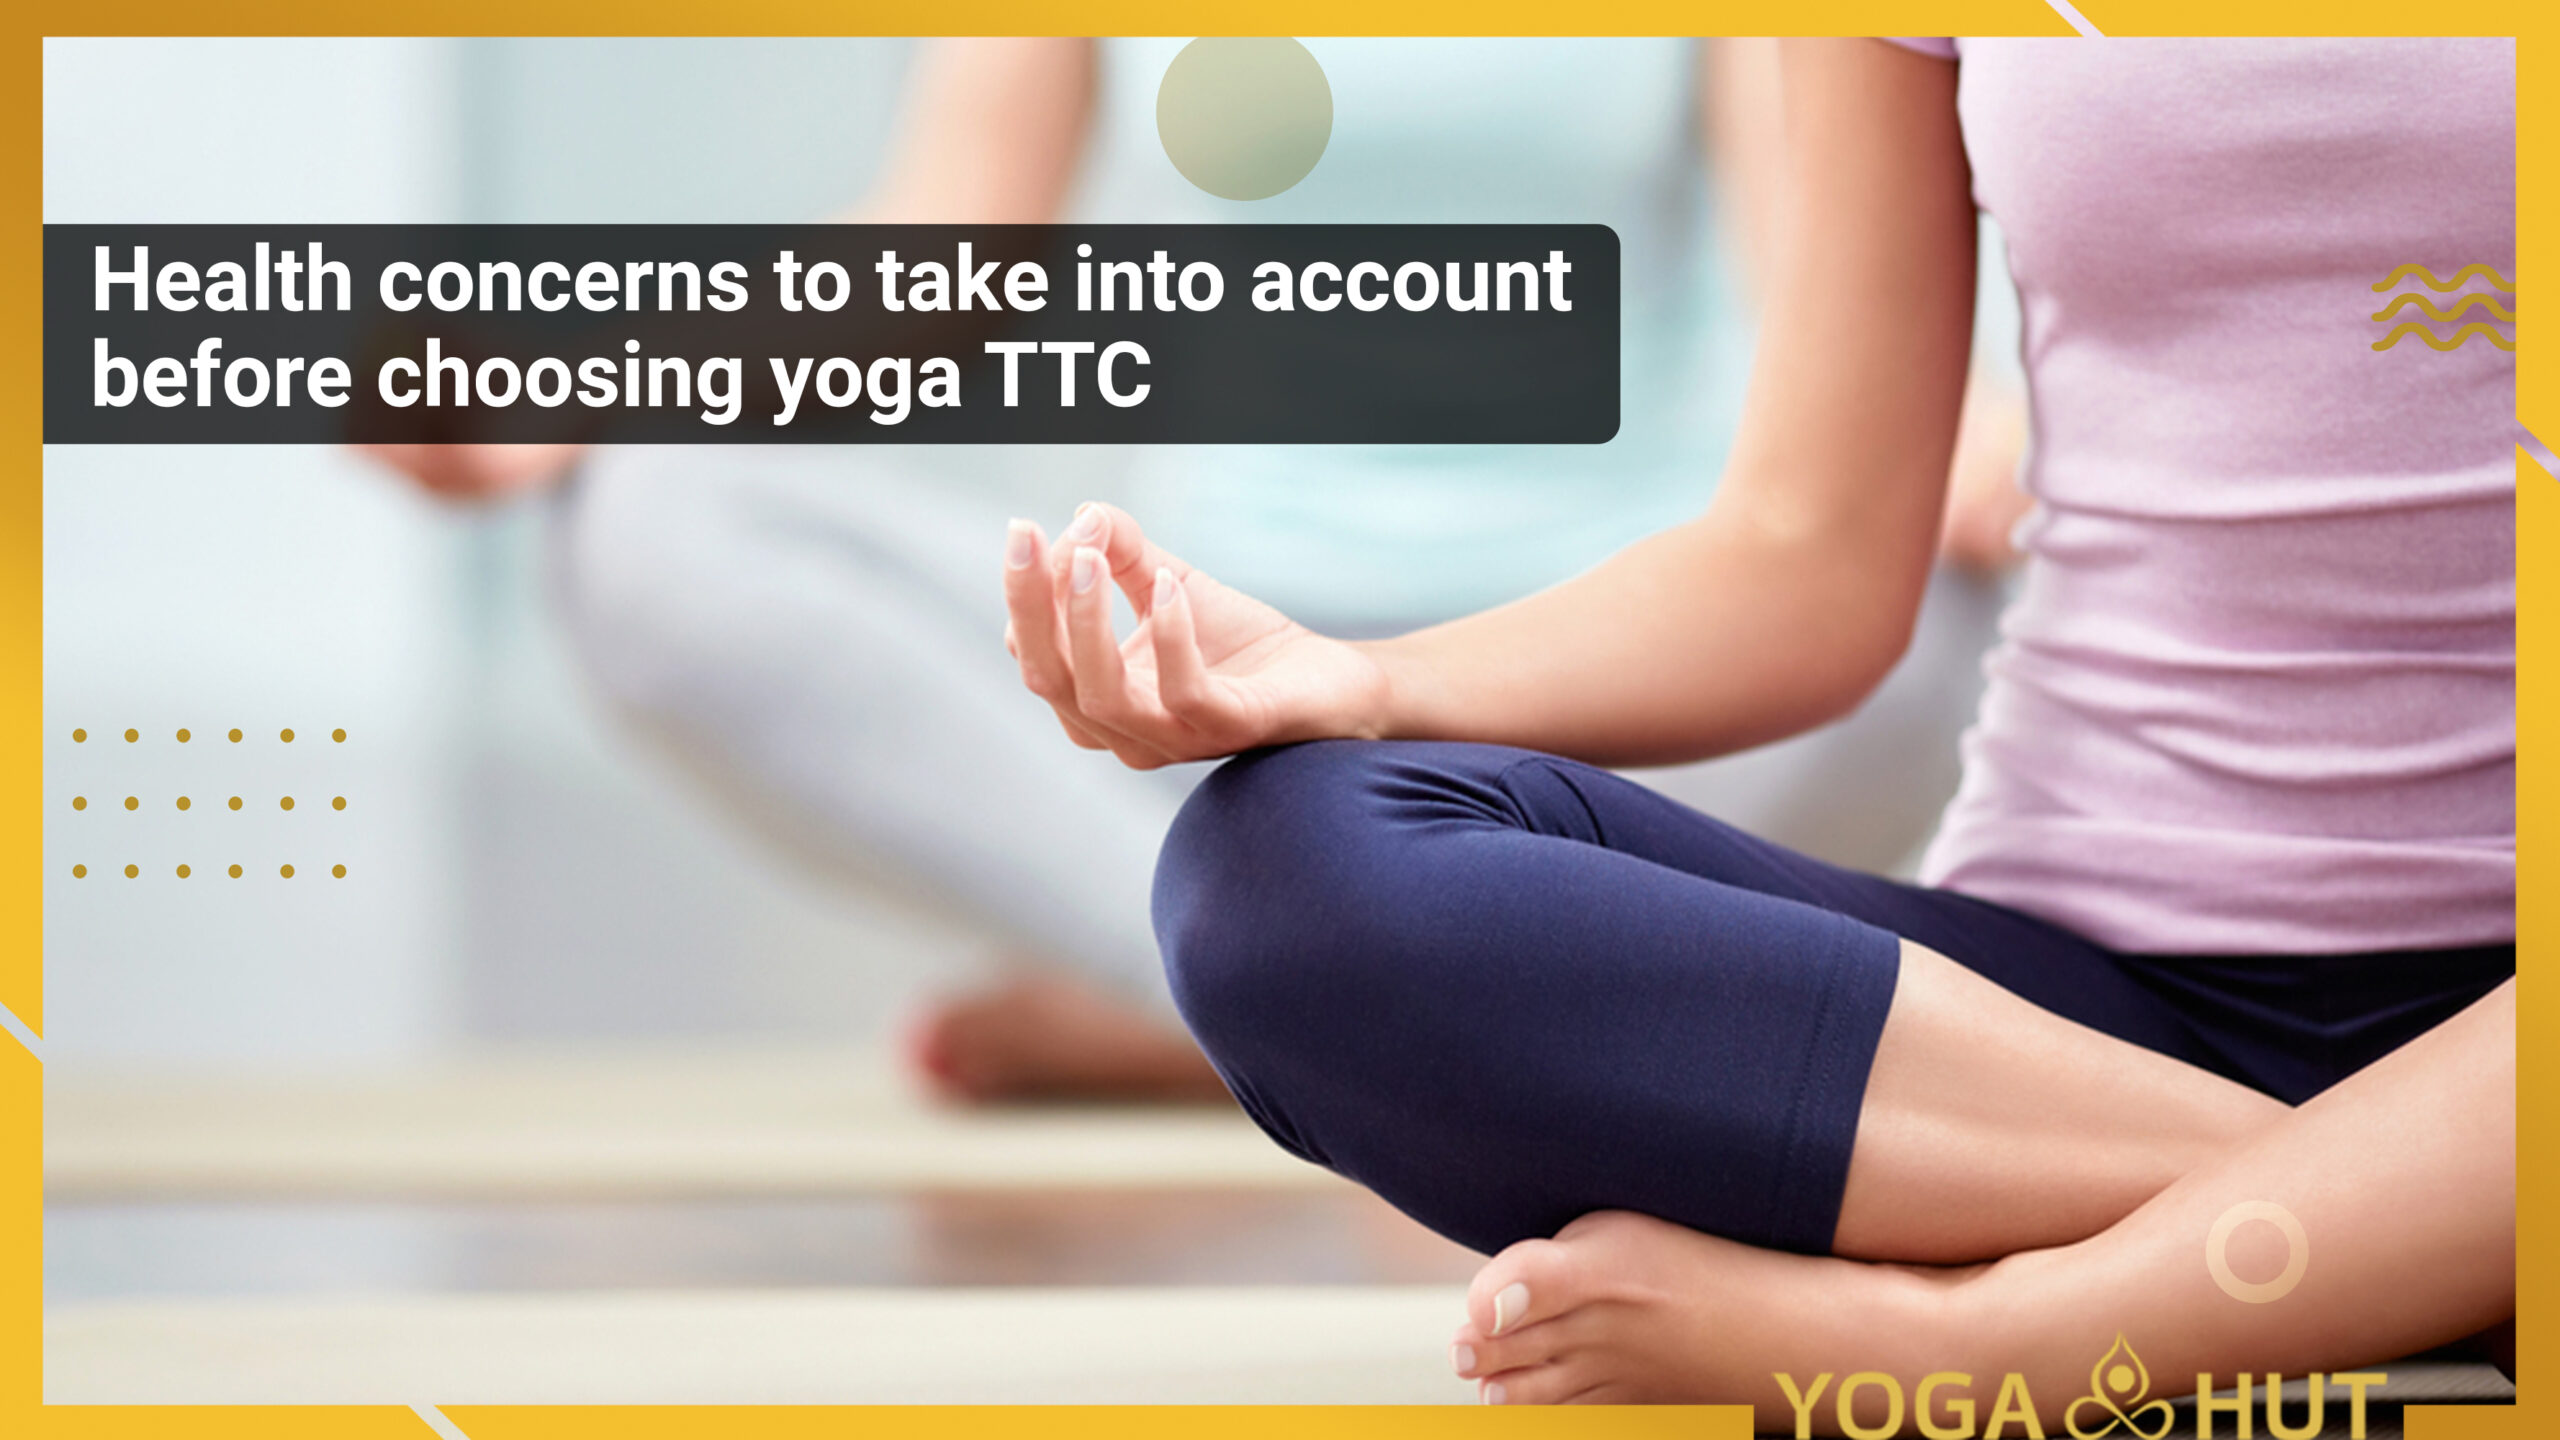 Health concerns to take into account before choosing yoga TTC